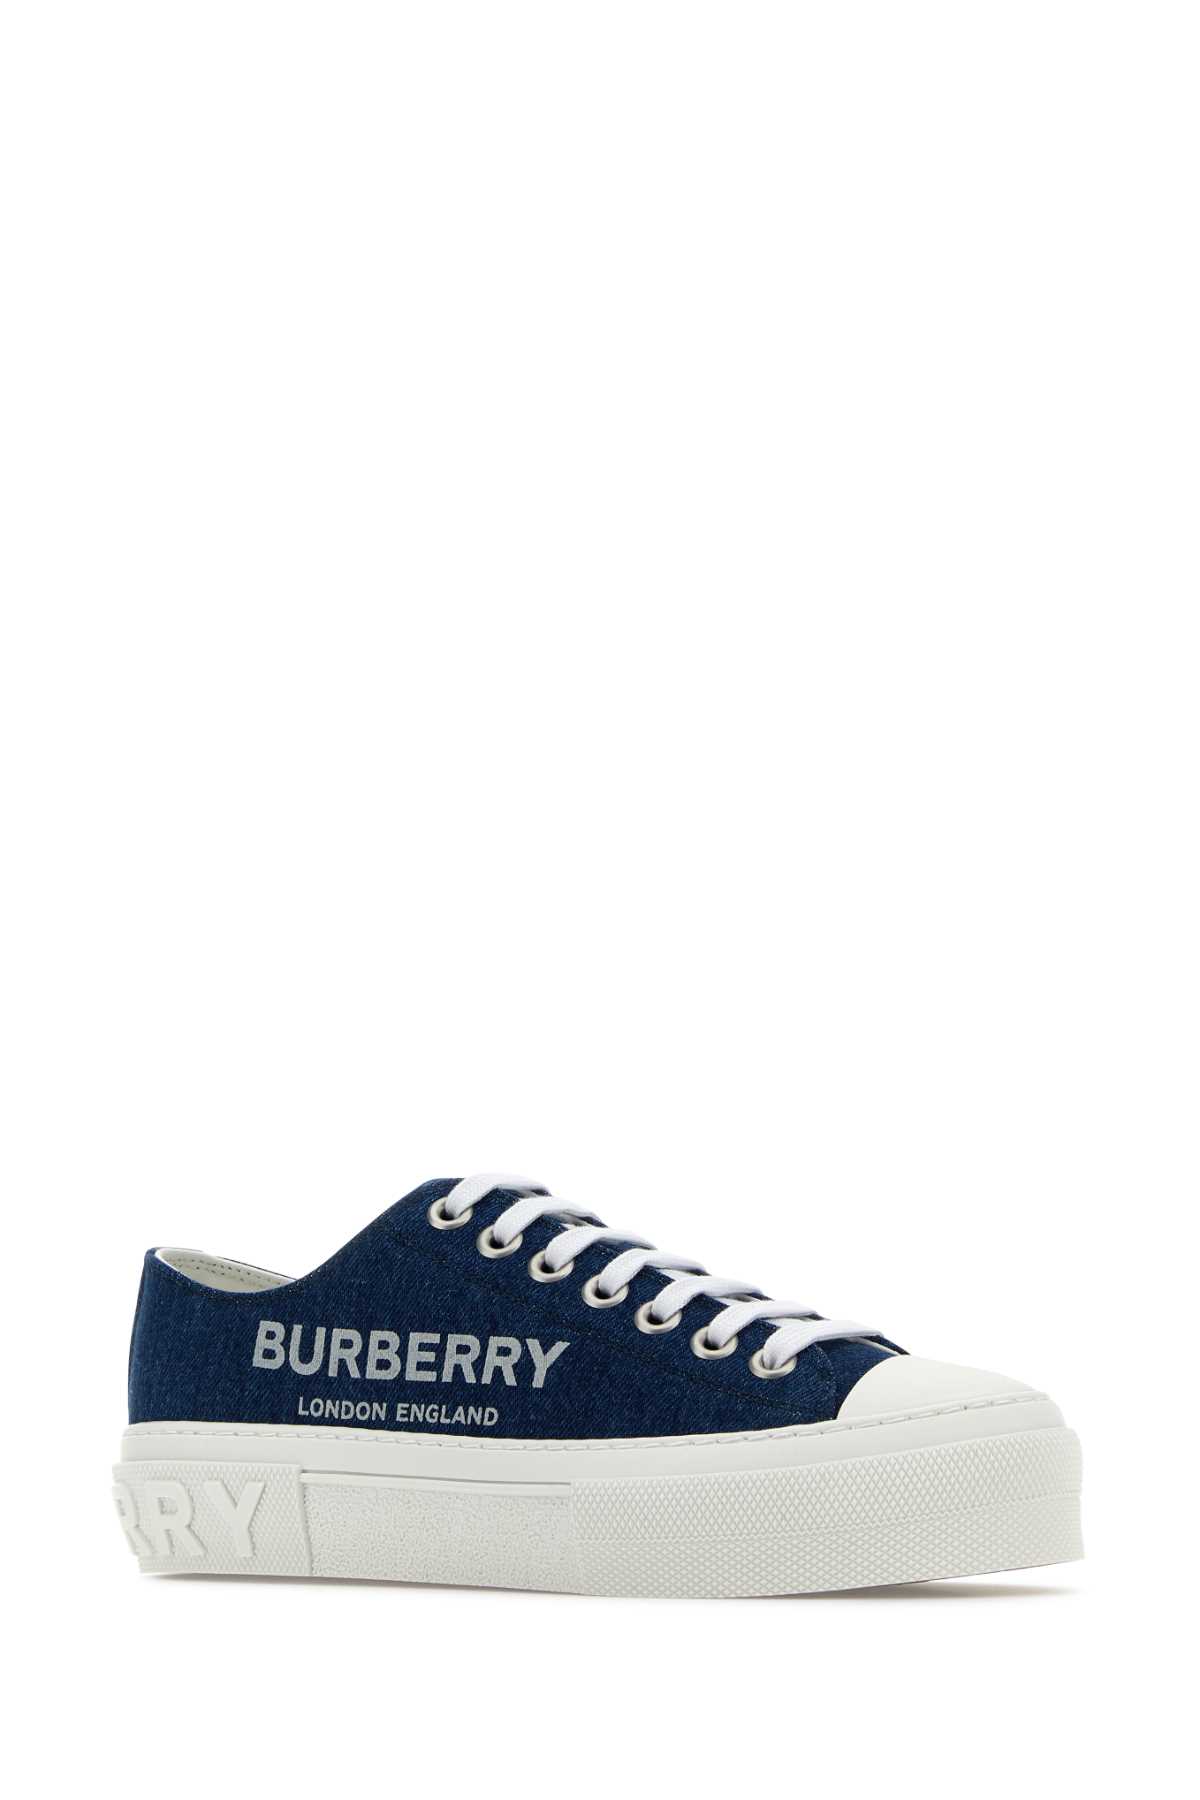 BURBERRY DEMIN COTTON SNEAKERS